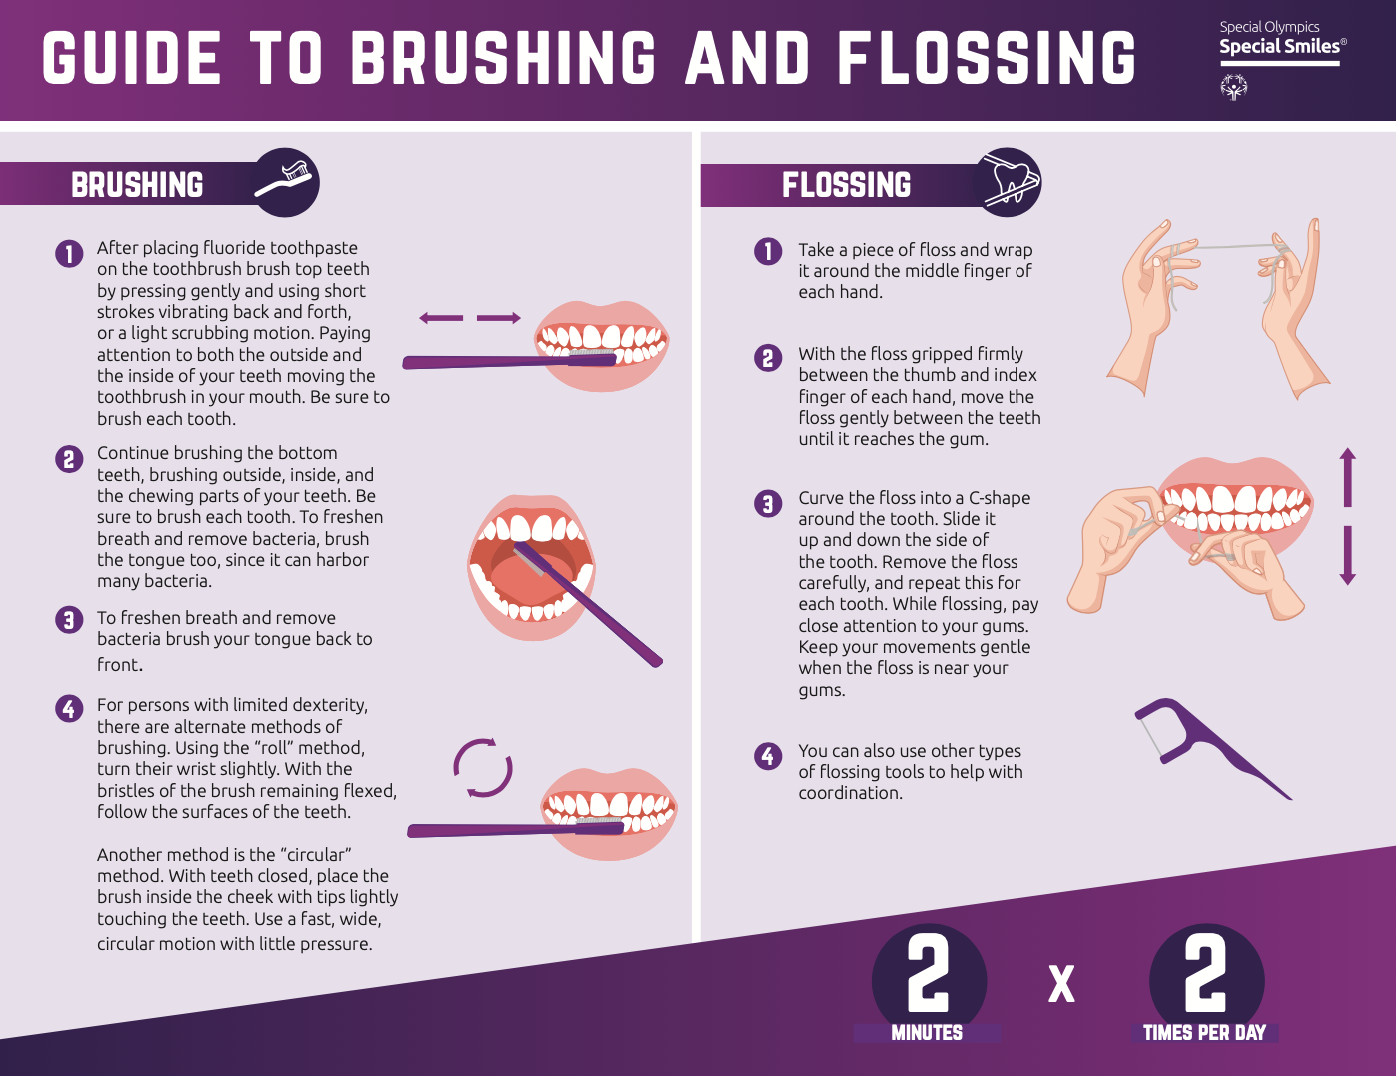 Guide to Brushing and Flossing